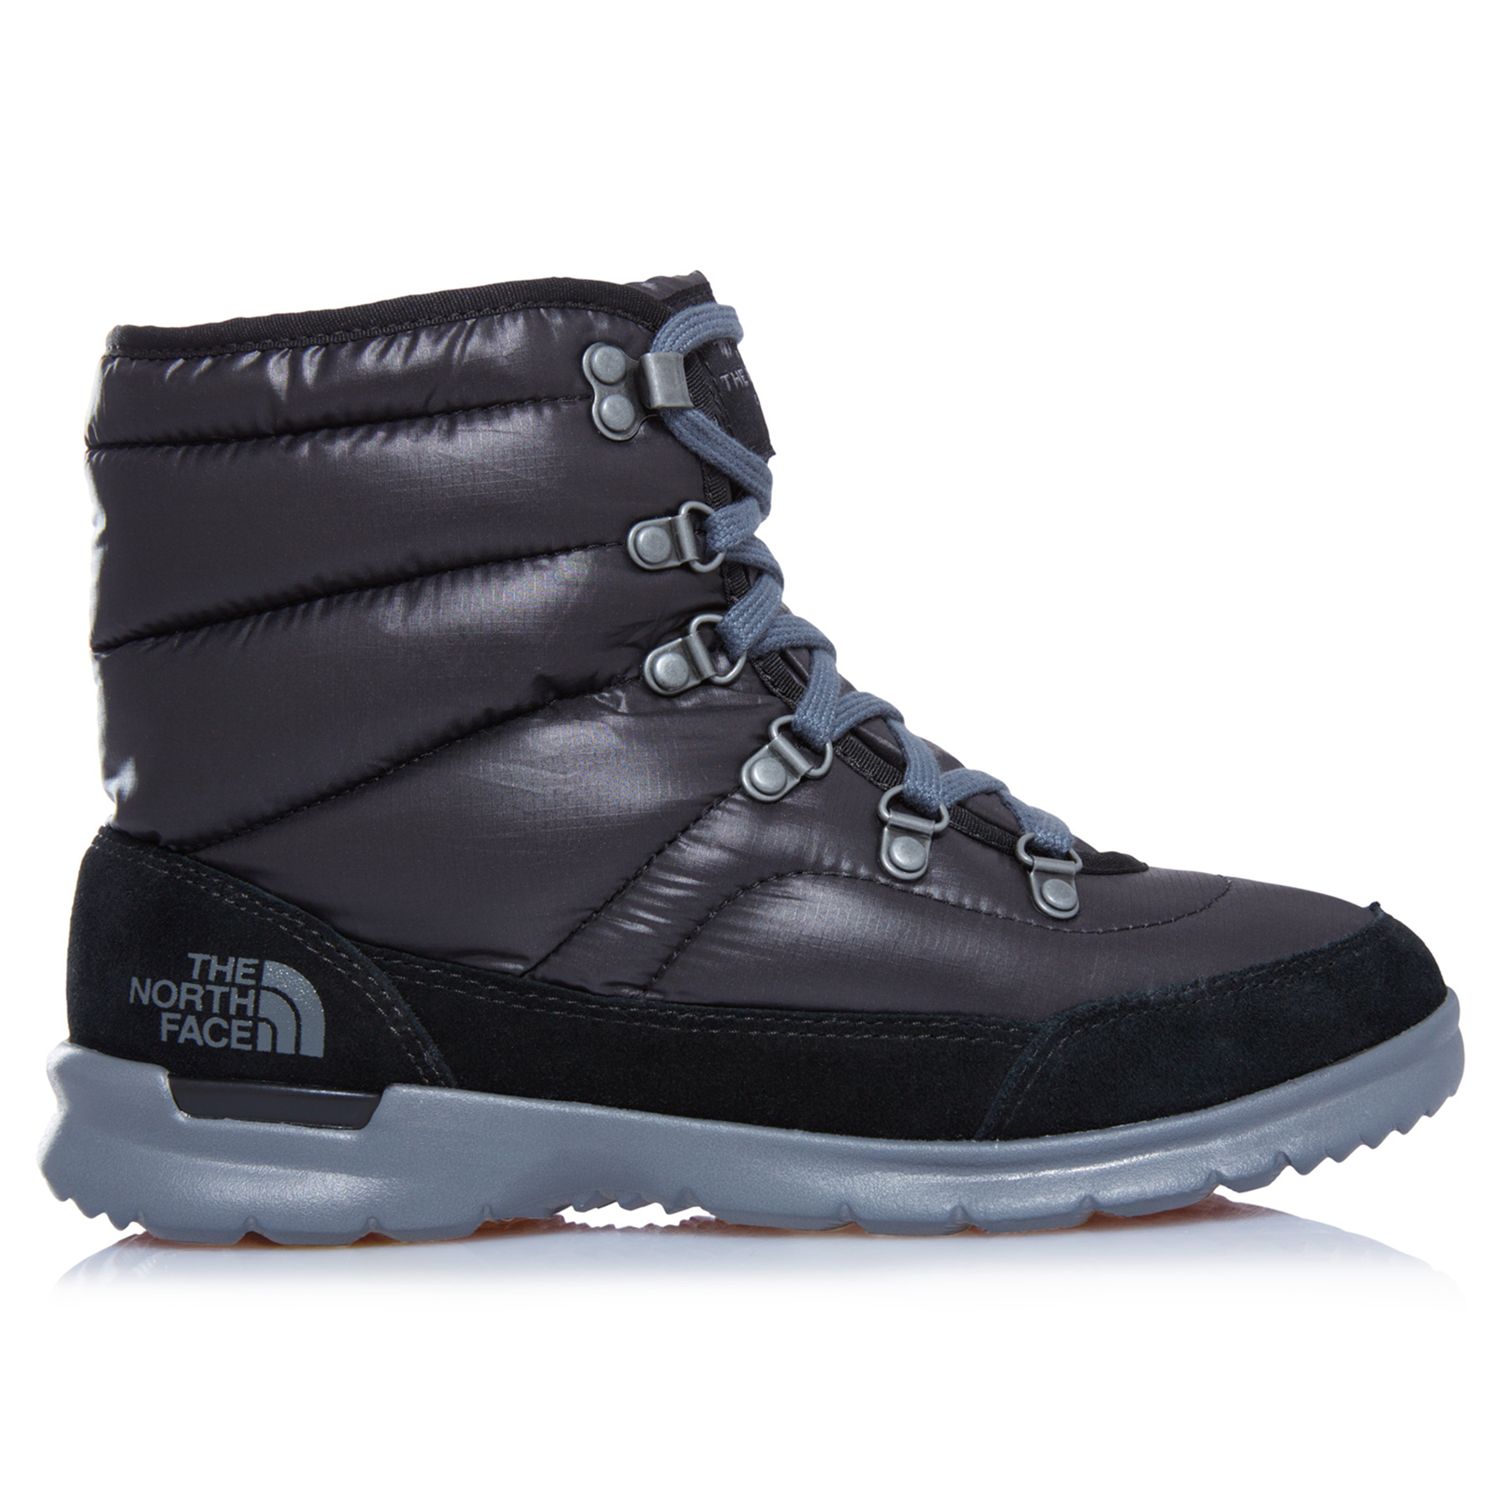 north face snow boots thermoball